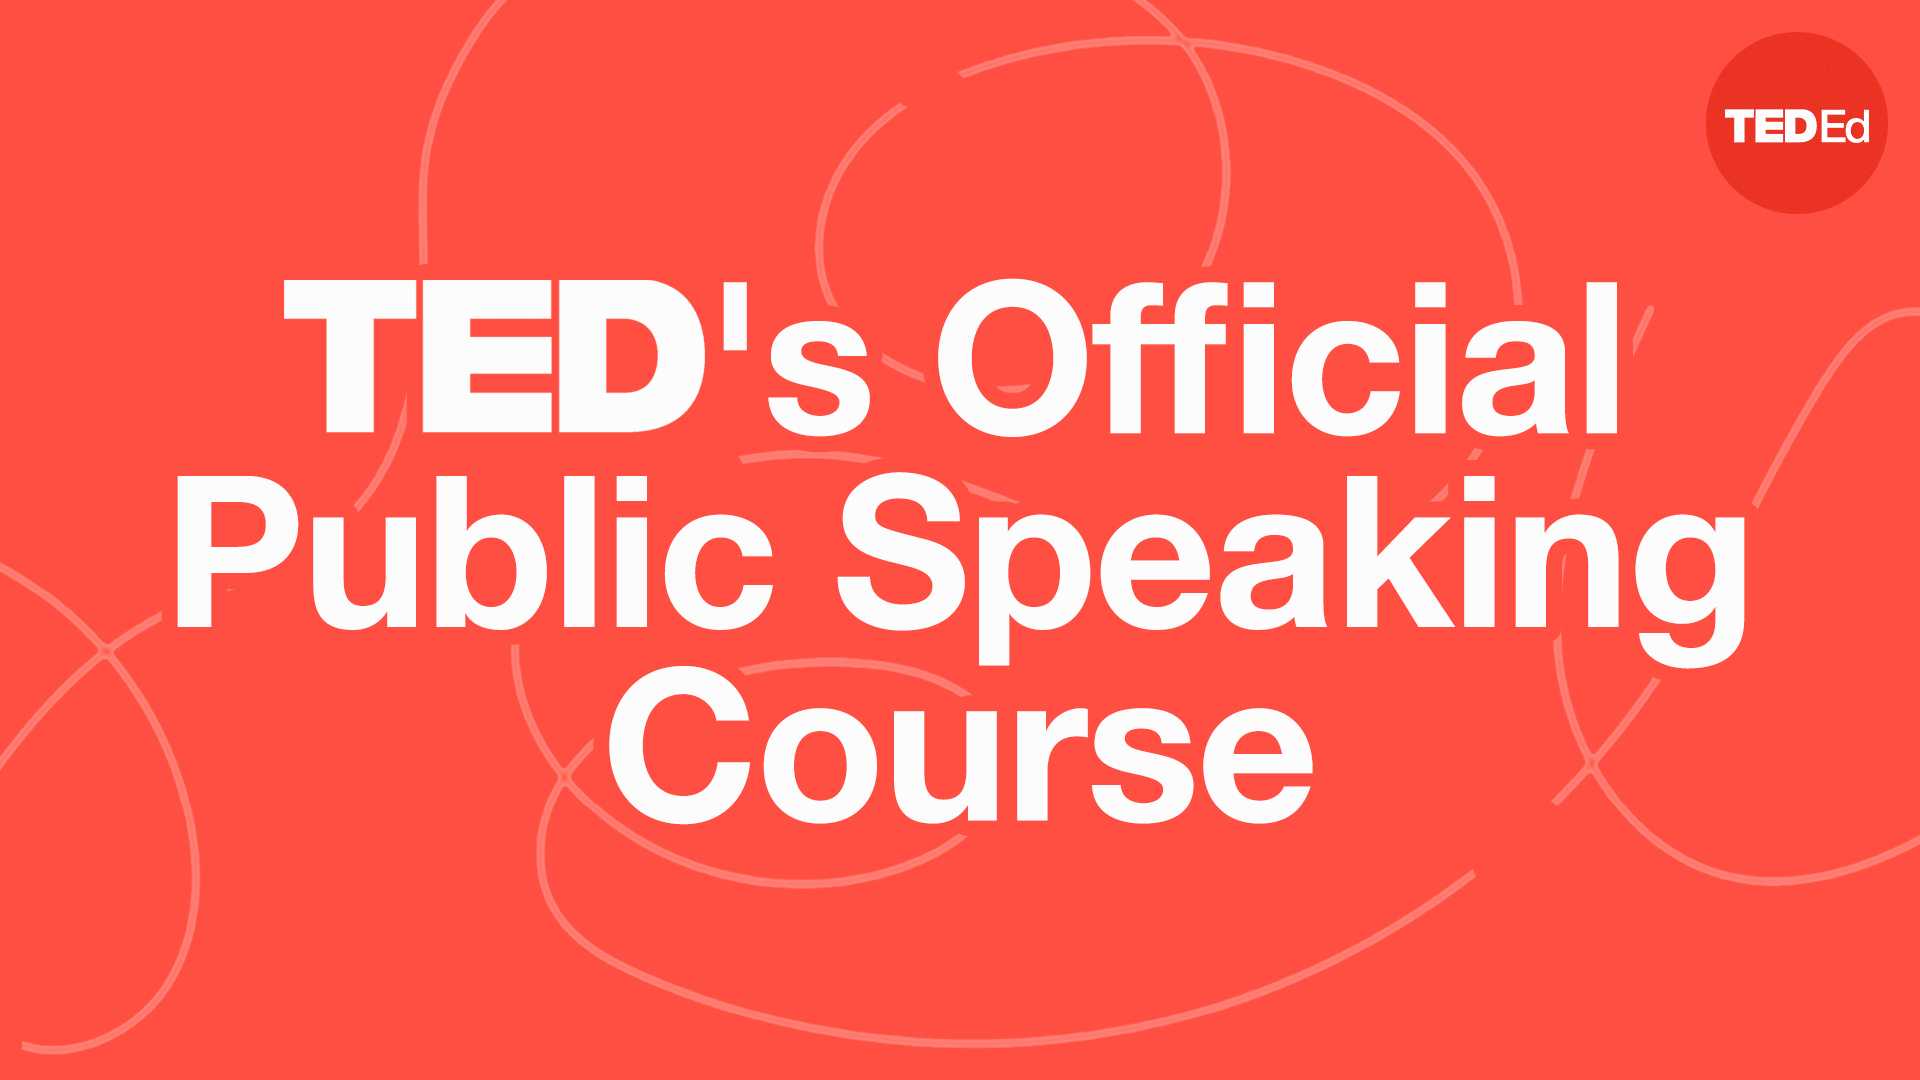 Ted Masterclass Teds Official Public Speaking Course